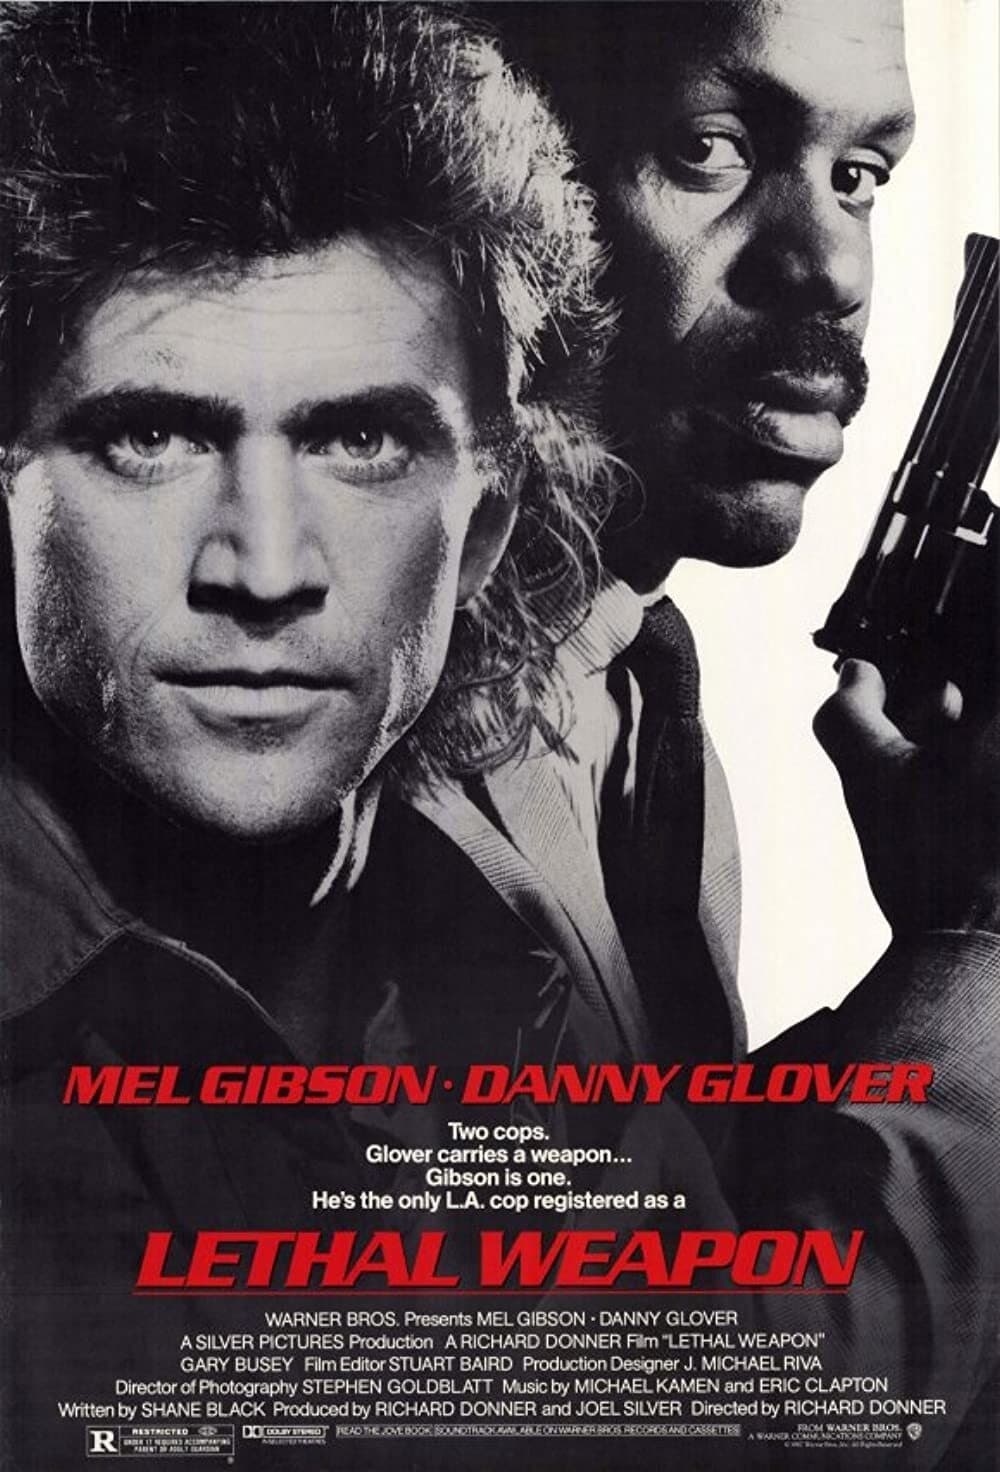 Episode 98 - Lethal Weapon (1987)